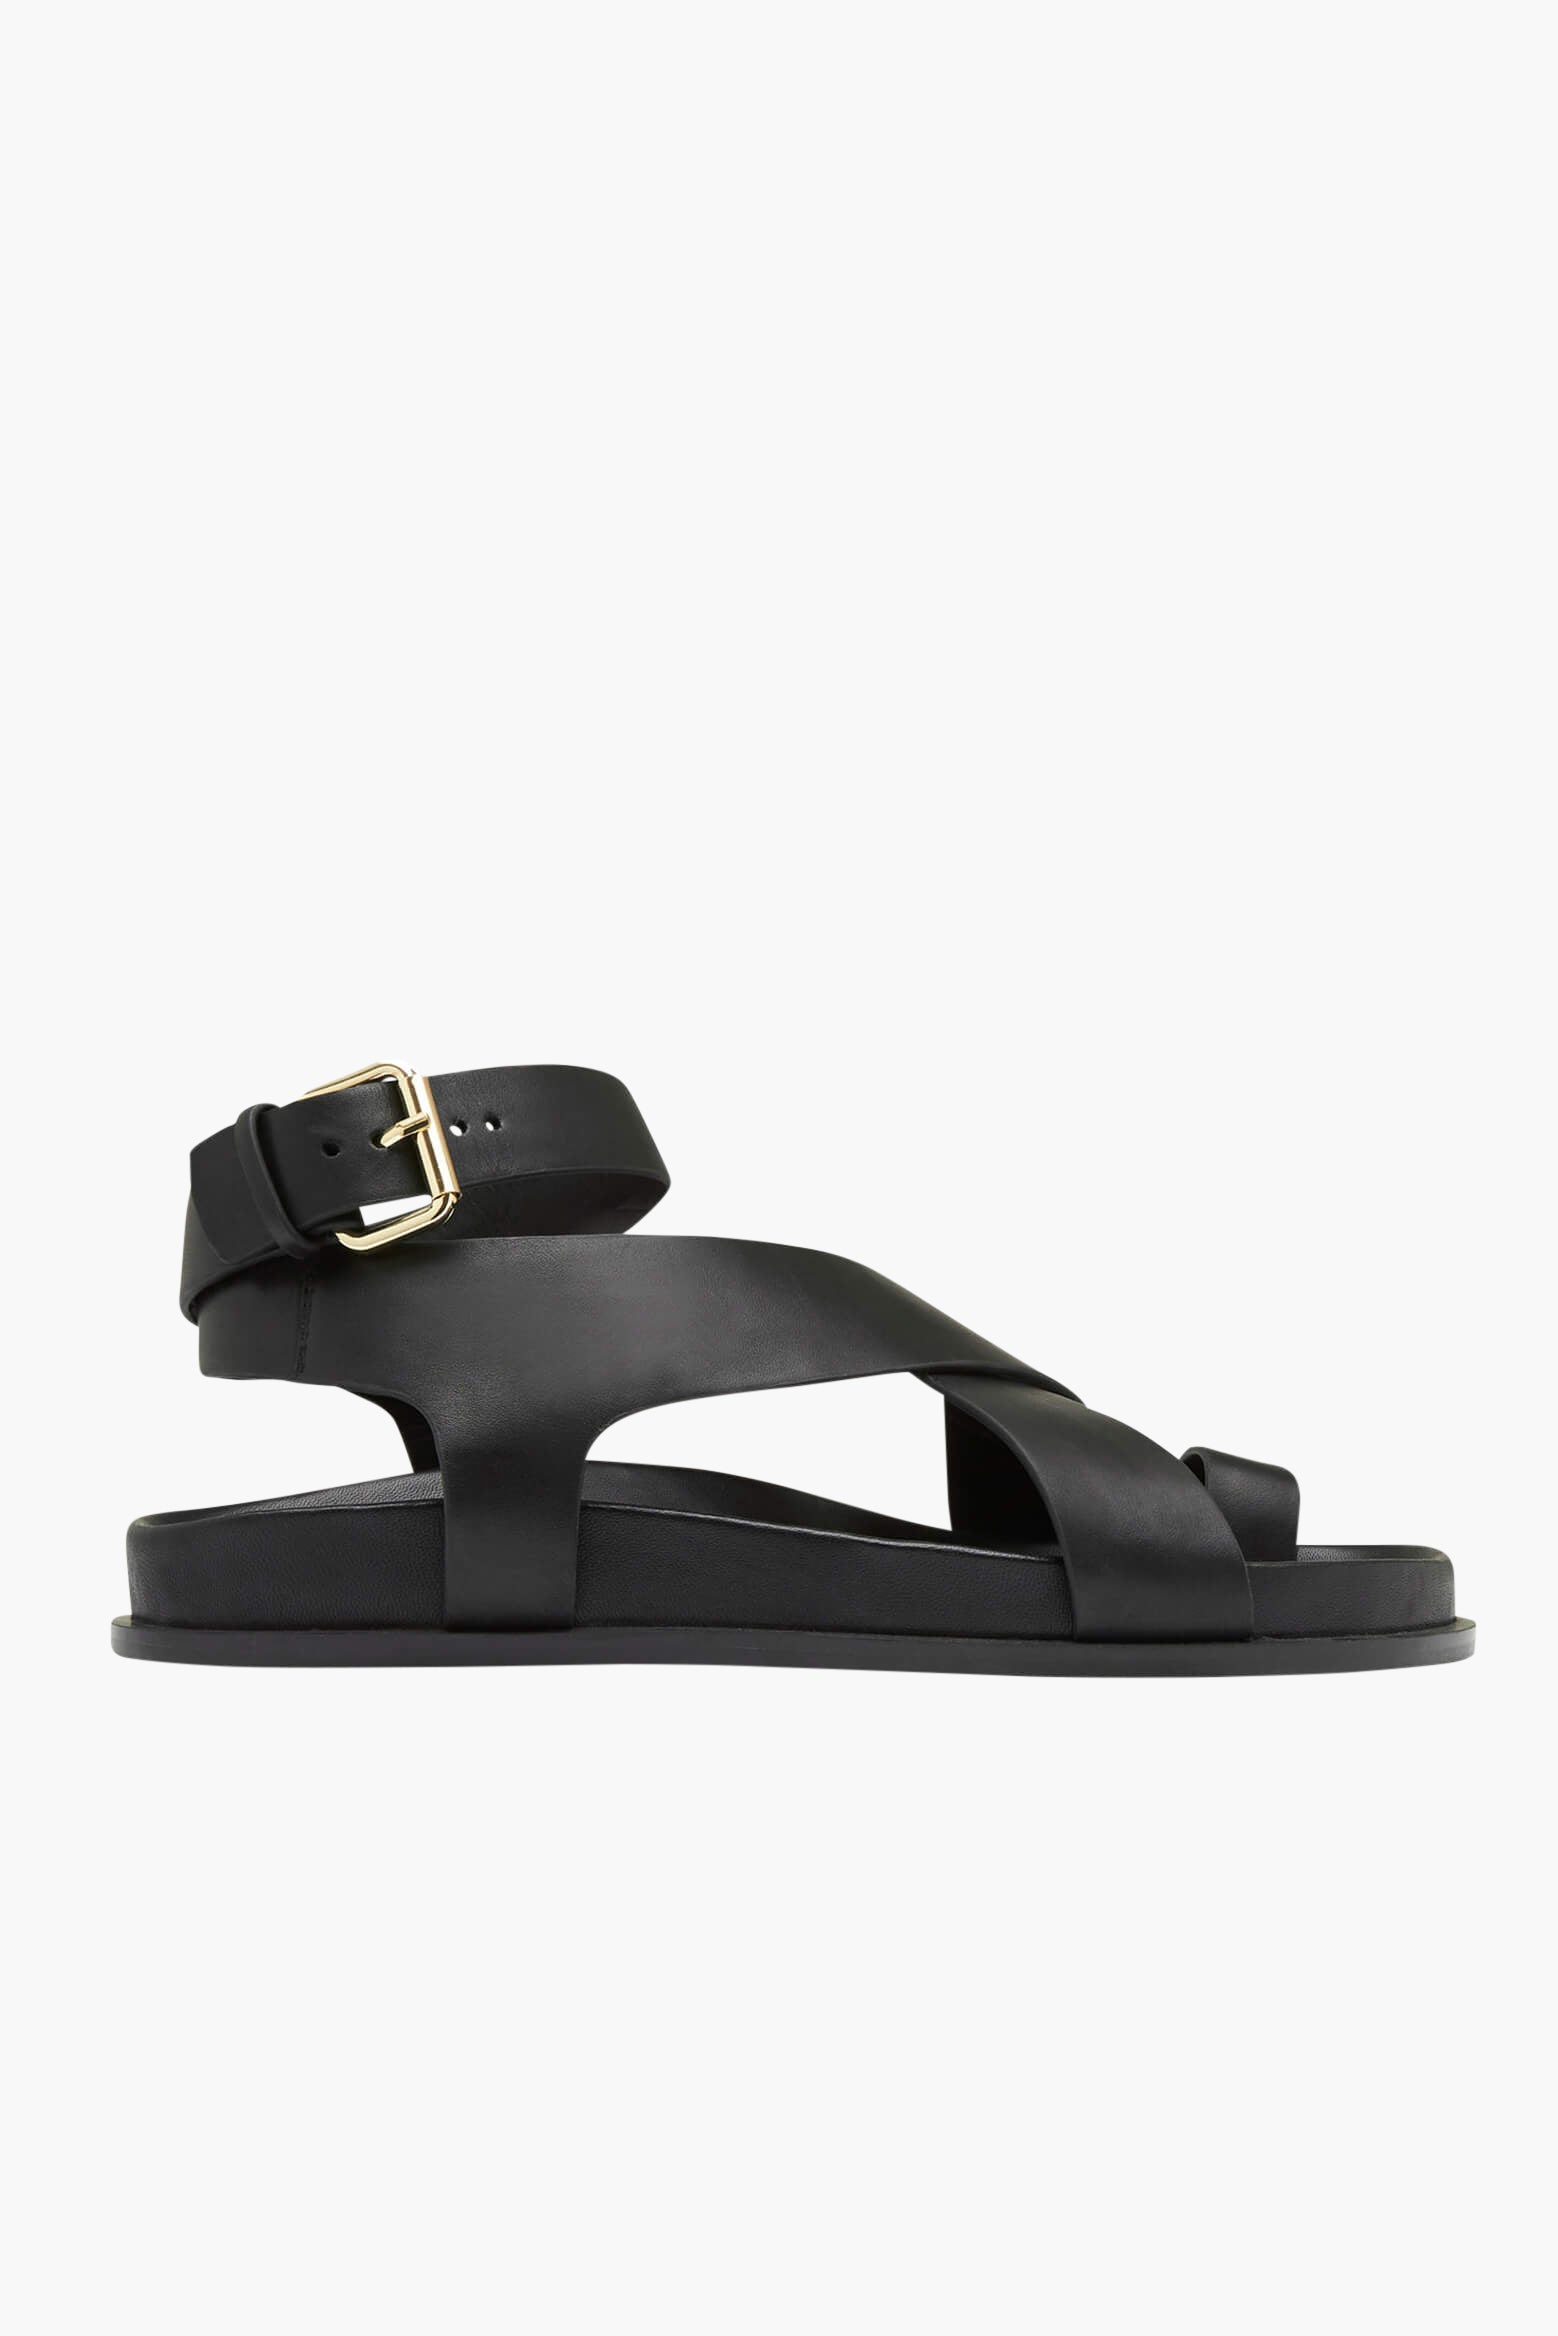 A.Emery Jalen Sandal in Black from The New Trend